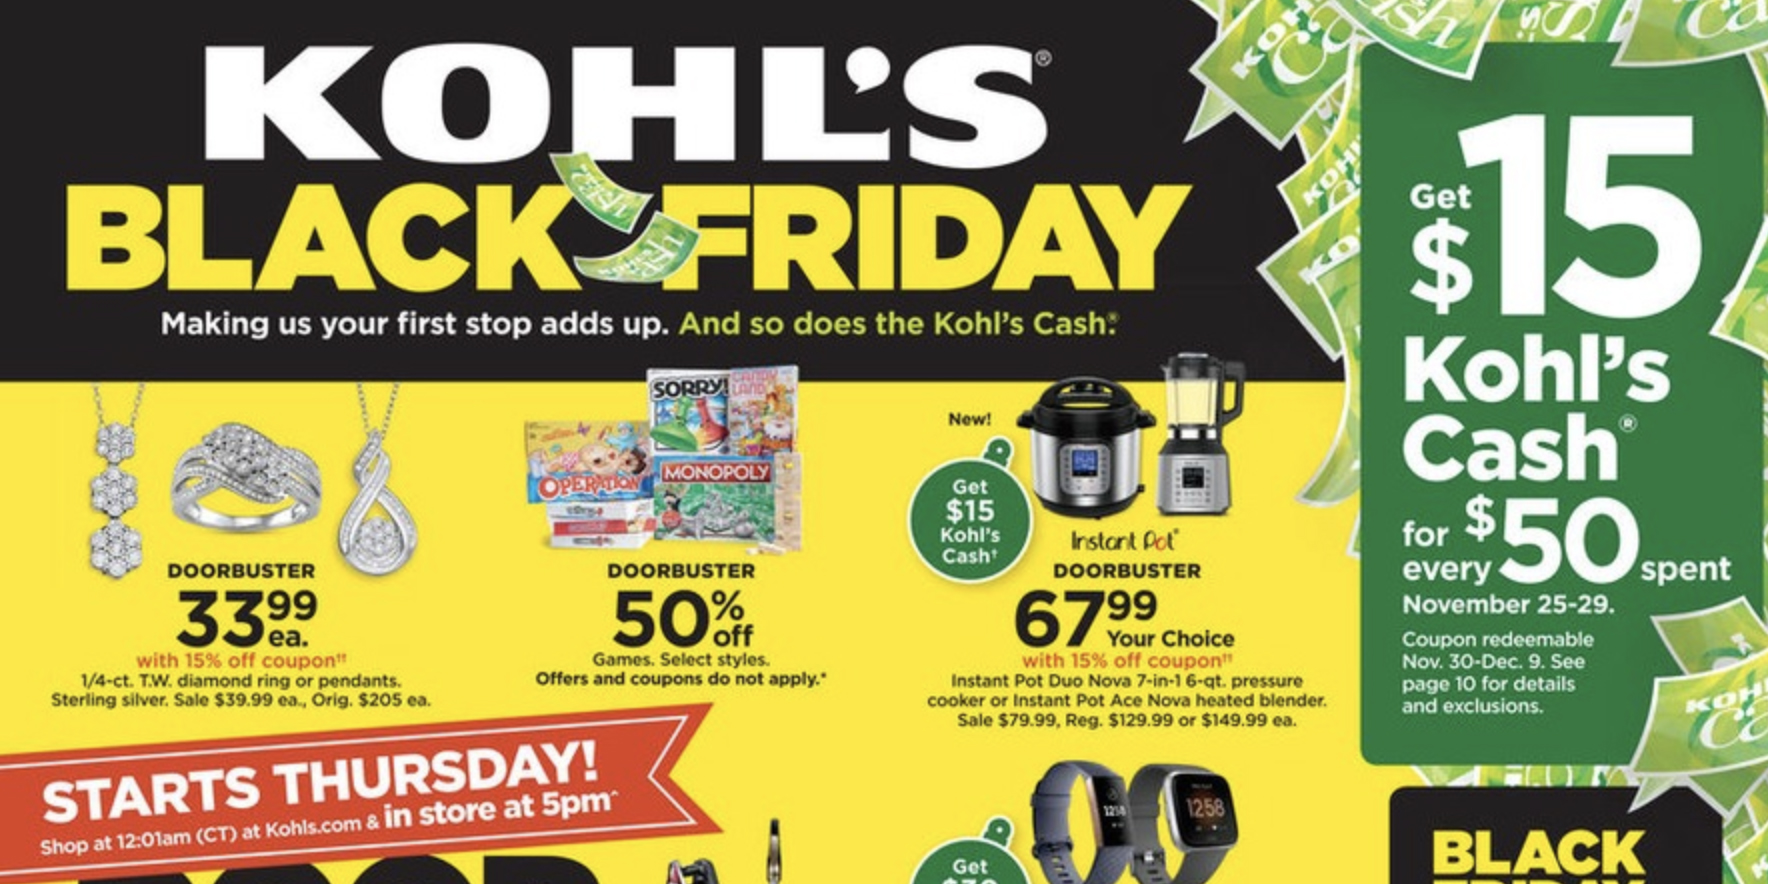 fitbit at kohl's black friday